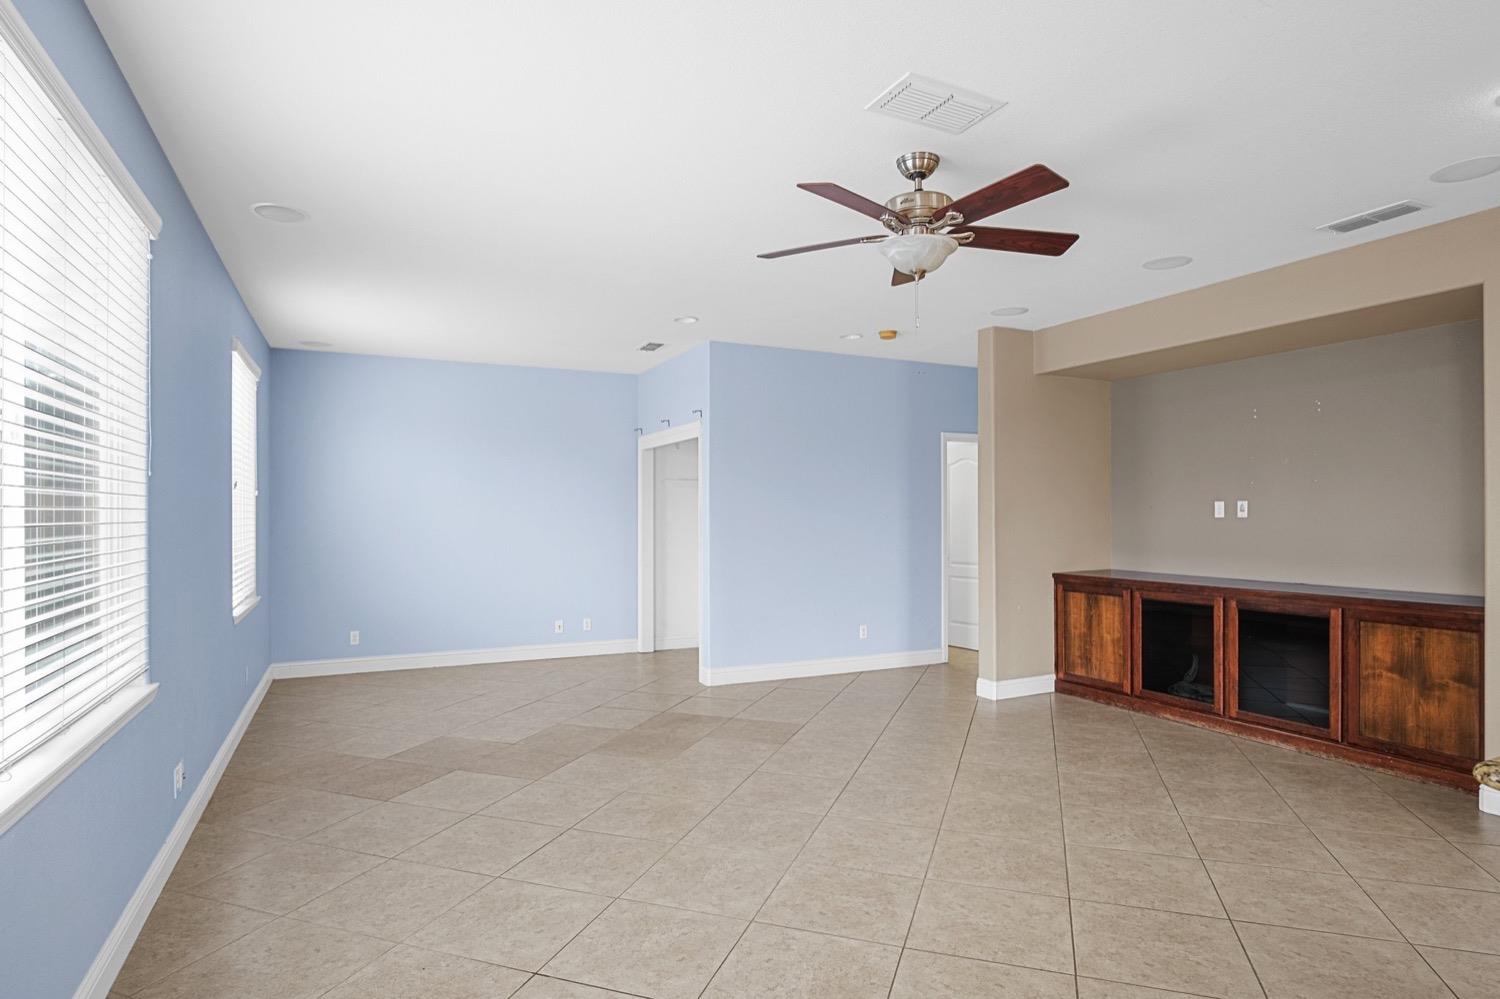 a view of an empty room with a window and a ceiling fan